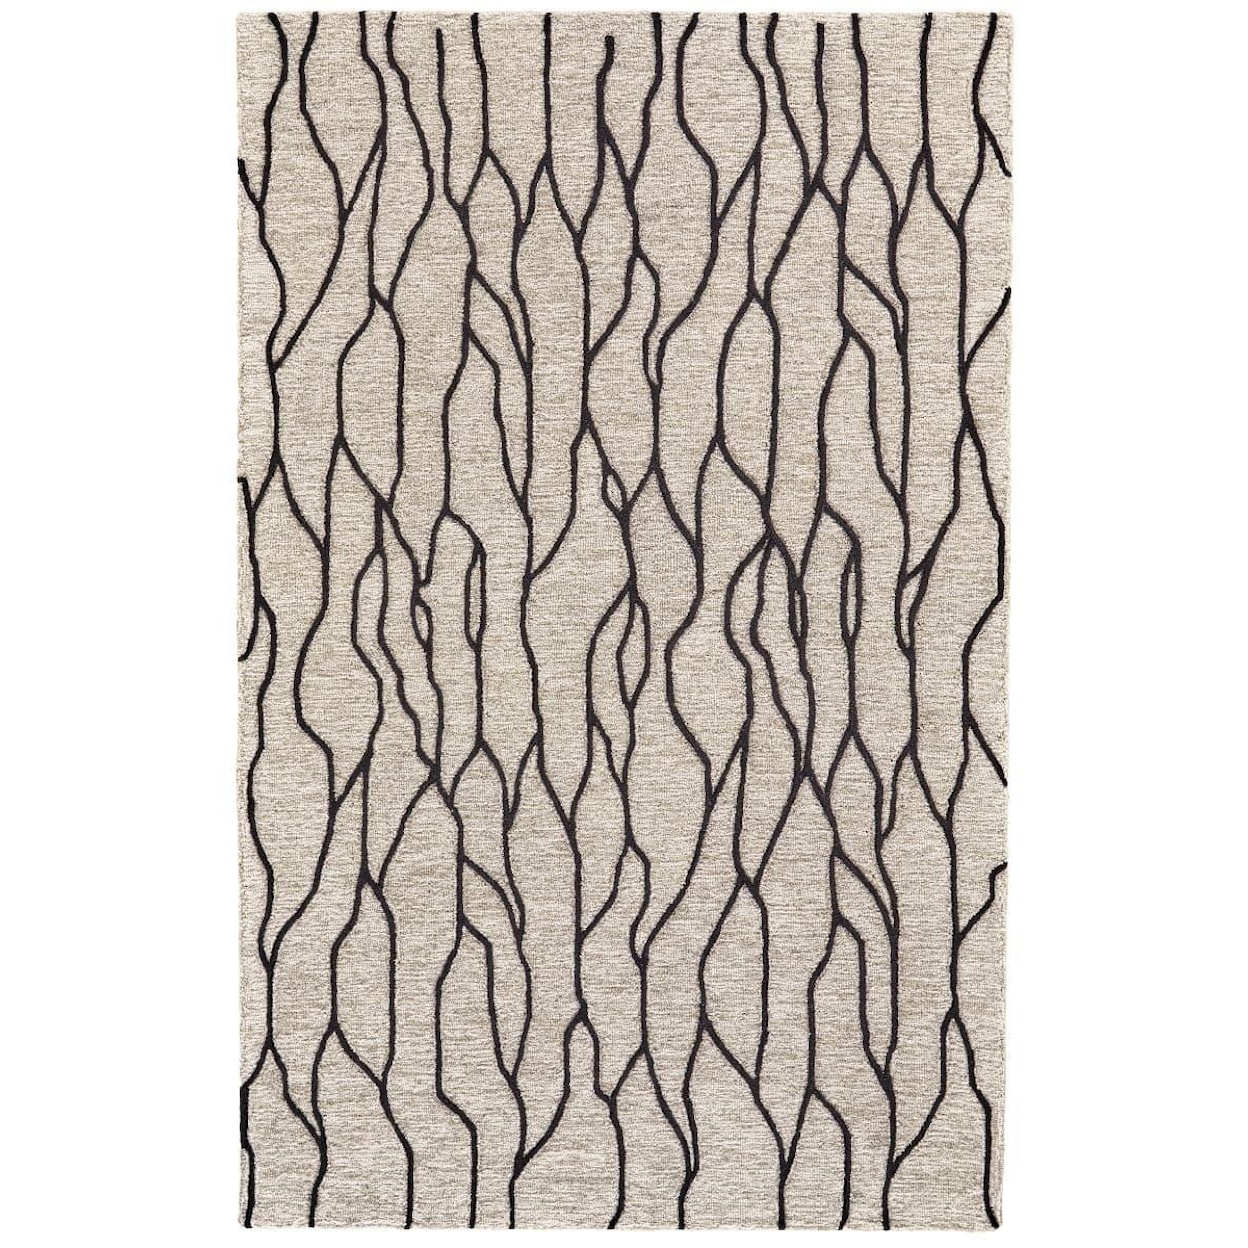 Feizy Rugs Enzo 5 x 8 Area Rug